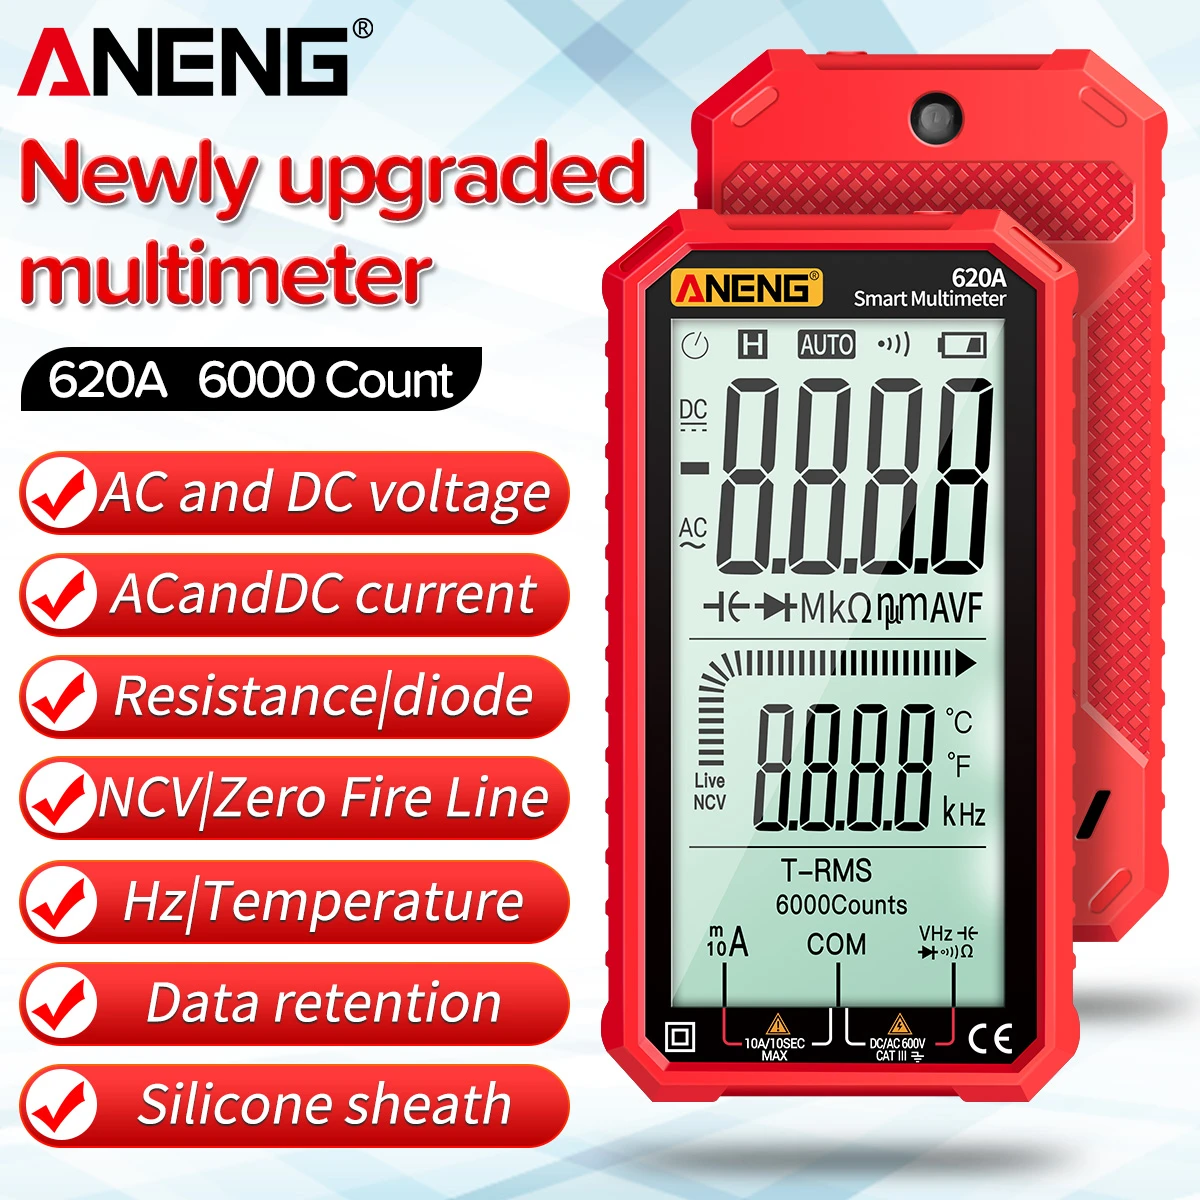 ANENG Digital Multimeter 620A 4.7-Inch LCD Display AC/DC Ultraportable True-RMS Auto-Ranging Multi Tester NCV Test